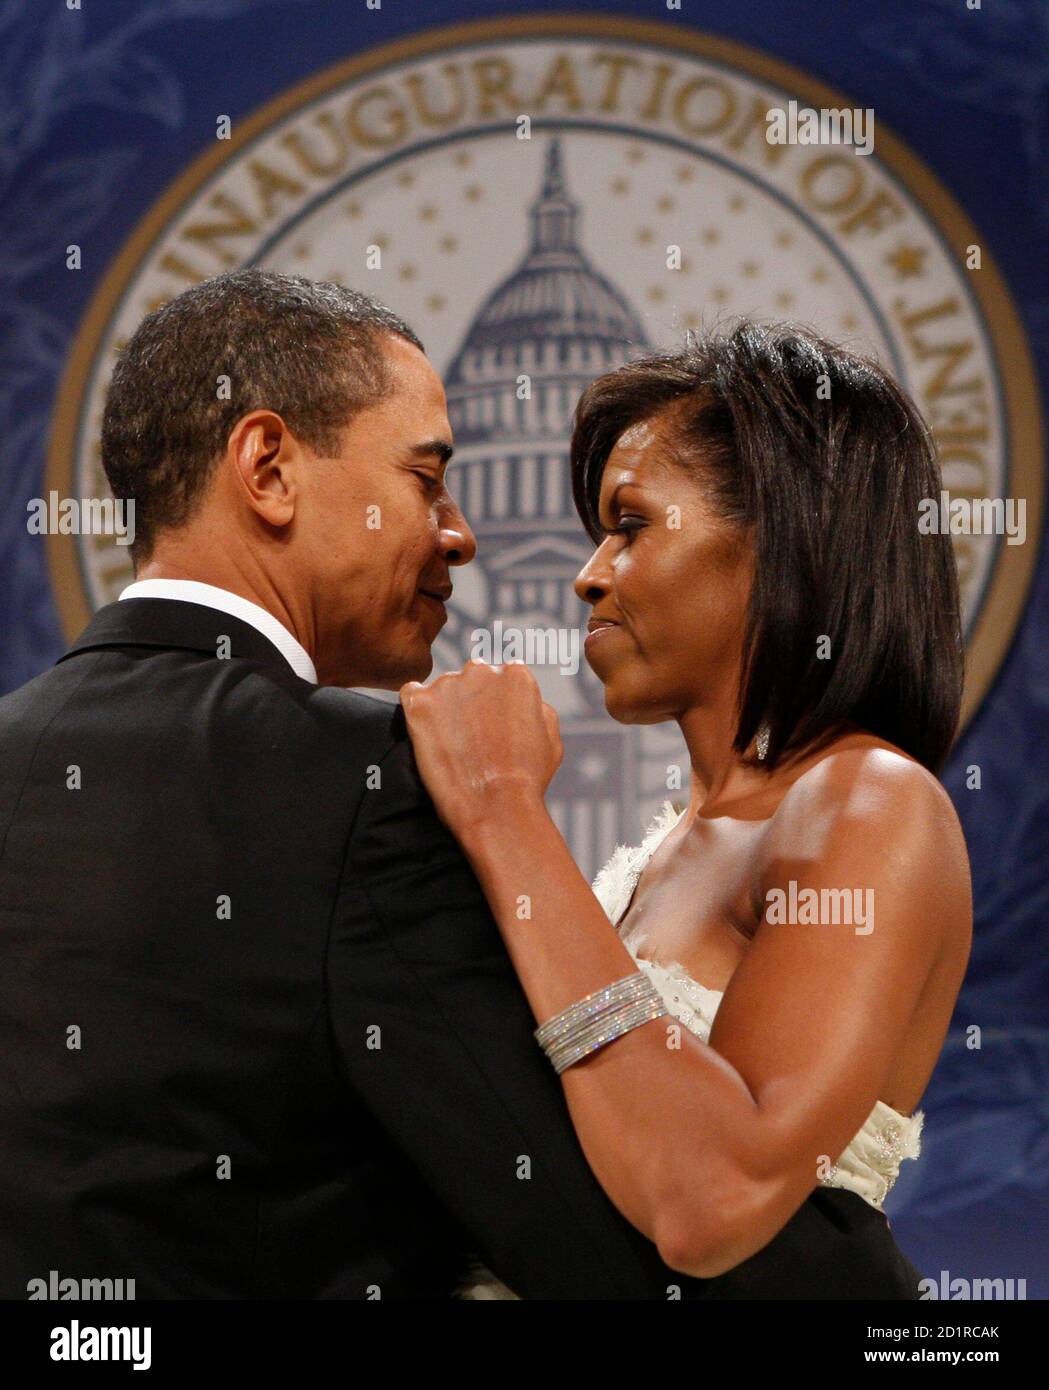 U.S. President Barack Obama and his wife Michelle dance at the Southern  Regional Inaugural Ball in Washington, January 20, 2009. Obama took power  as the first black U.S. president on Tuesday and